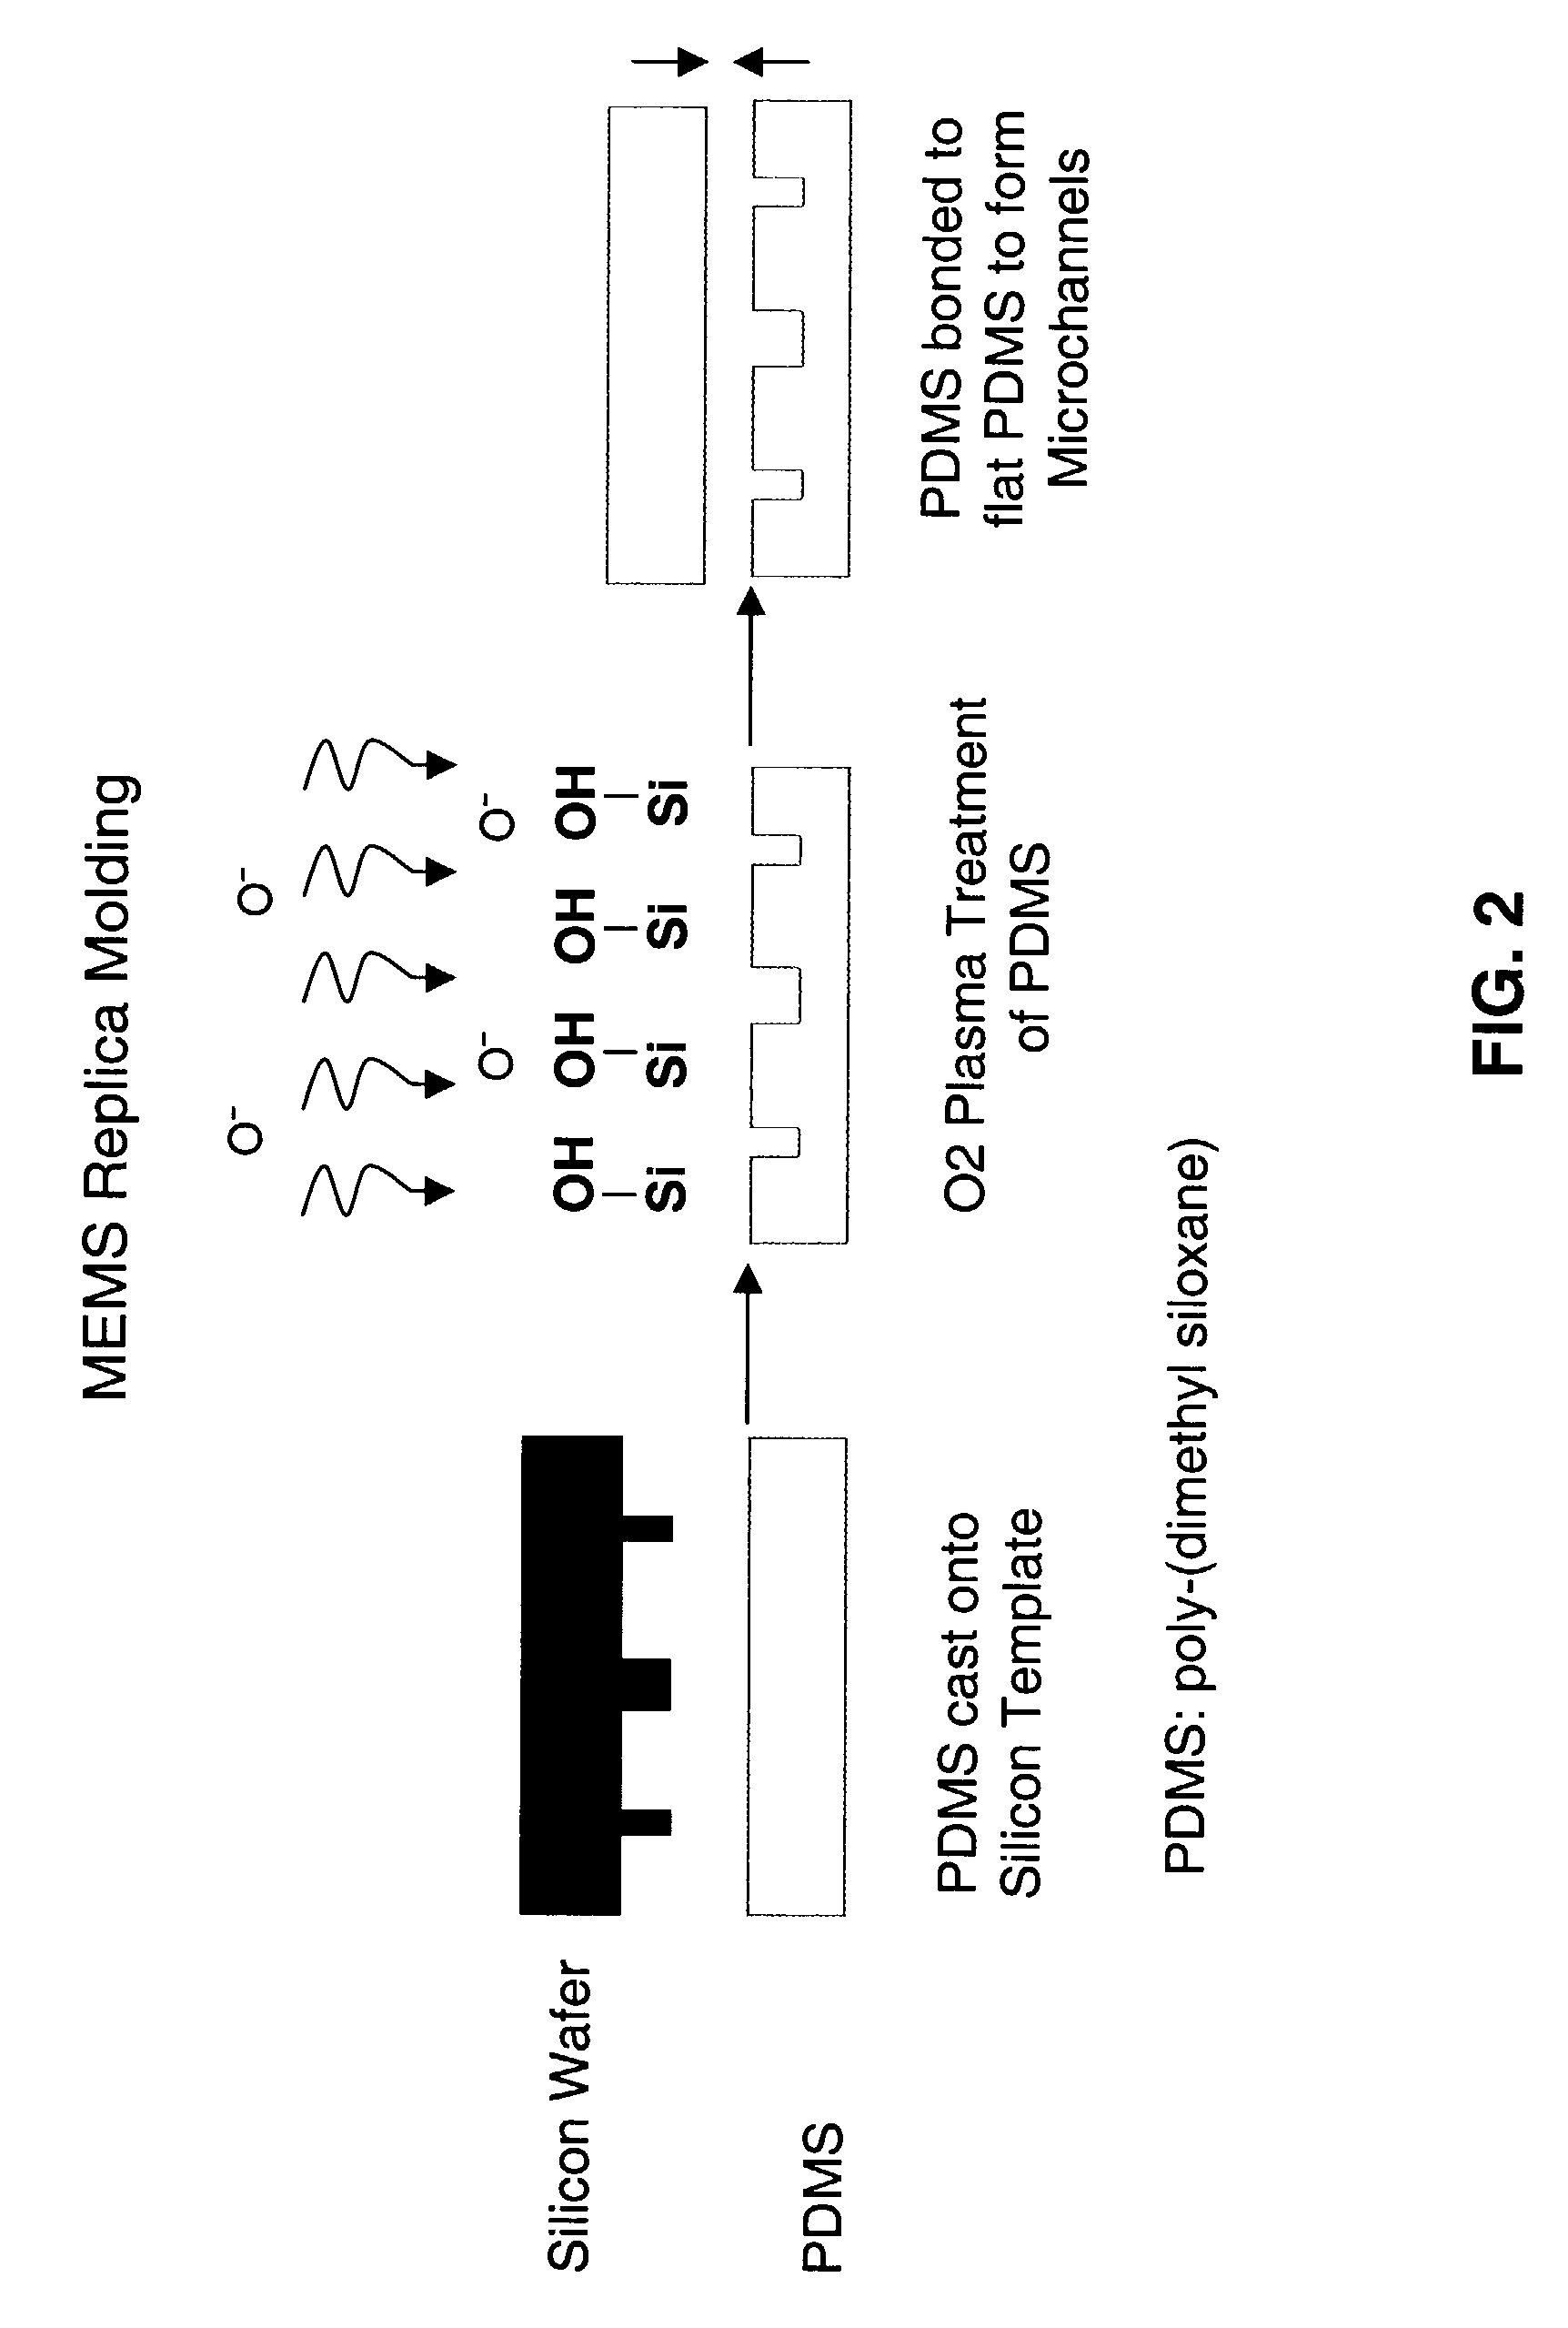 Fabrication of tissue lamina using microfabricated two-dimensional molds